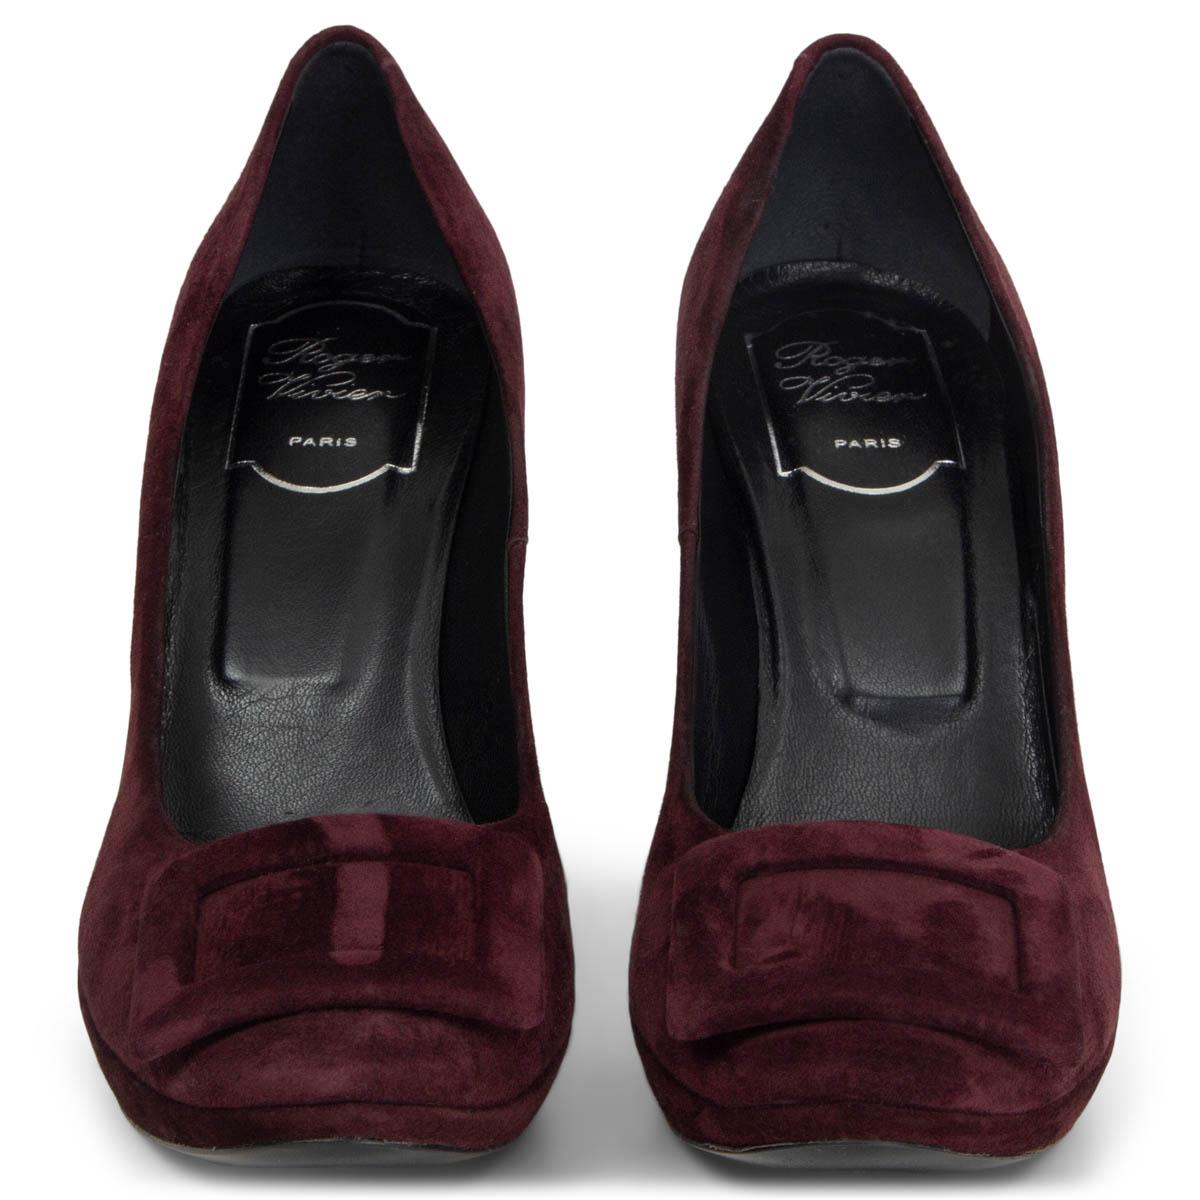 100% authentic Roger Vivier platform pumps in burgundy suede leather embellished with classic signature buckle. Have been worn and are in excellent condition. 

Measurements
Imprinted Size	38
Shoe Size	38
Inside Sole	25.5cm (9.9in)
Width	7.5cm